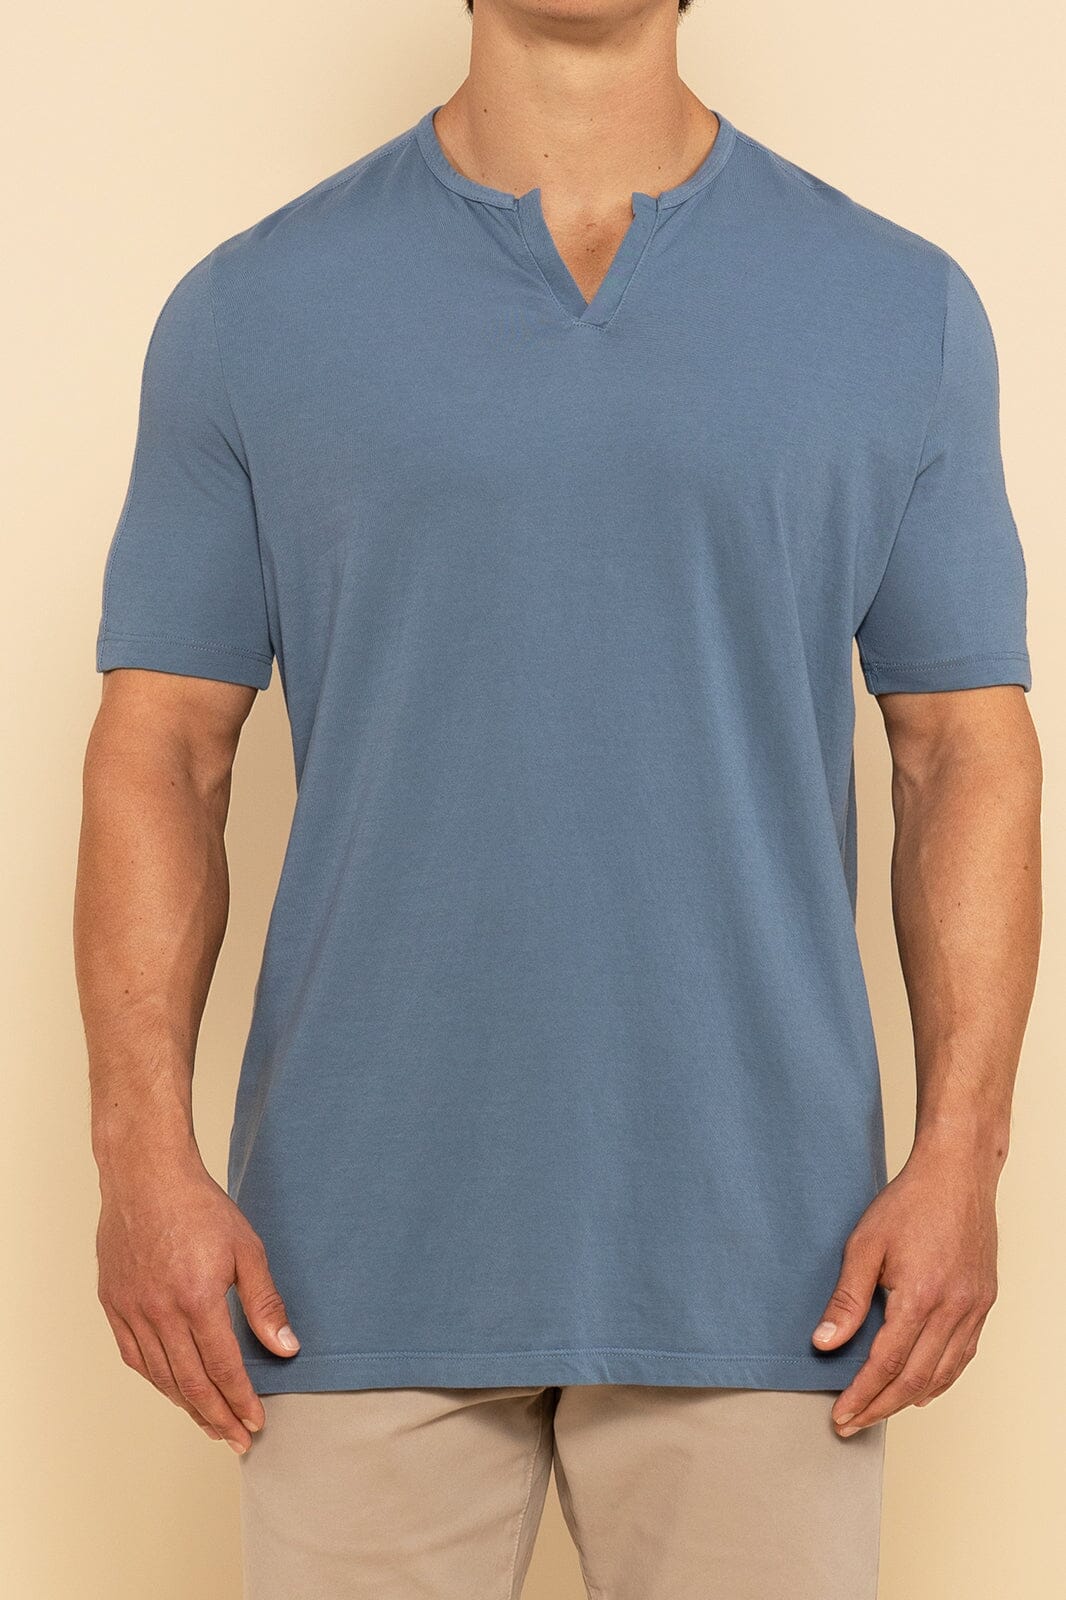 Notch Neck T Shirts for Men - Up to 71% off